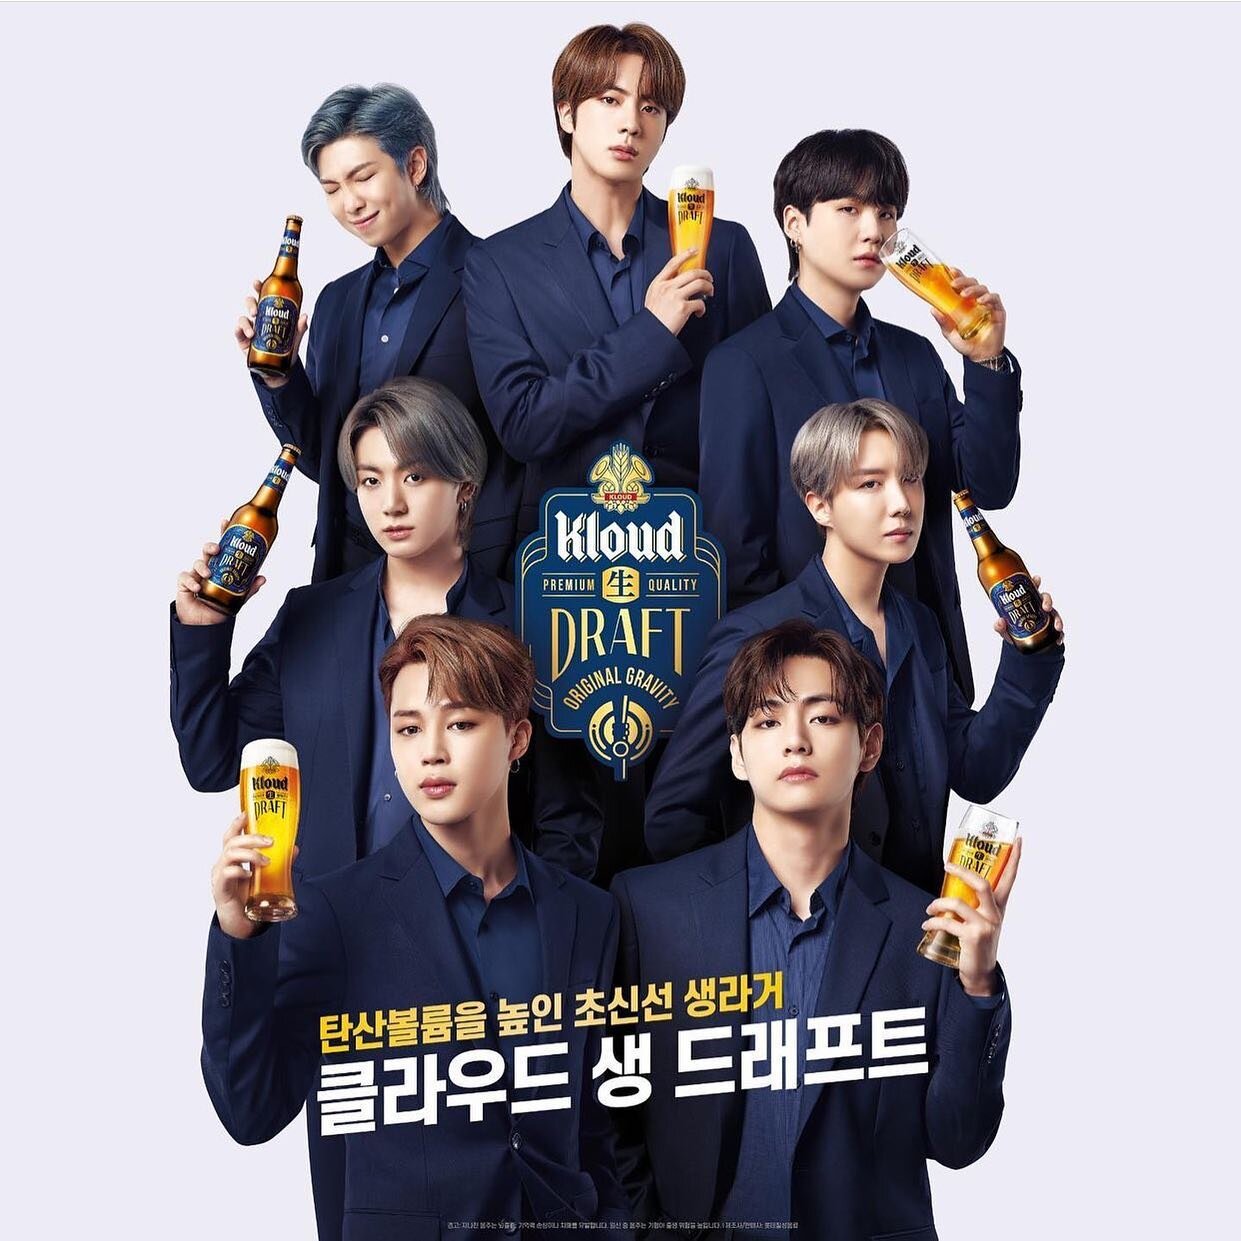 Introducing BTS as the newest spokes team for Kloud Premium Pilsner, Korea&rsquo;s beloved band. We wish you much happiness, love and thank you for your continued support. ❤️ #bts #btsarmy #kloud #korea #premium #pilsner #beer